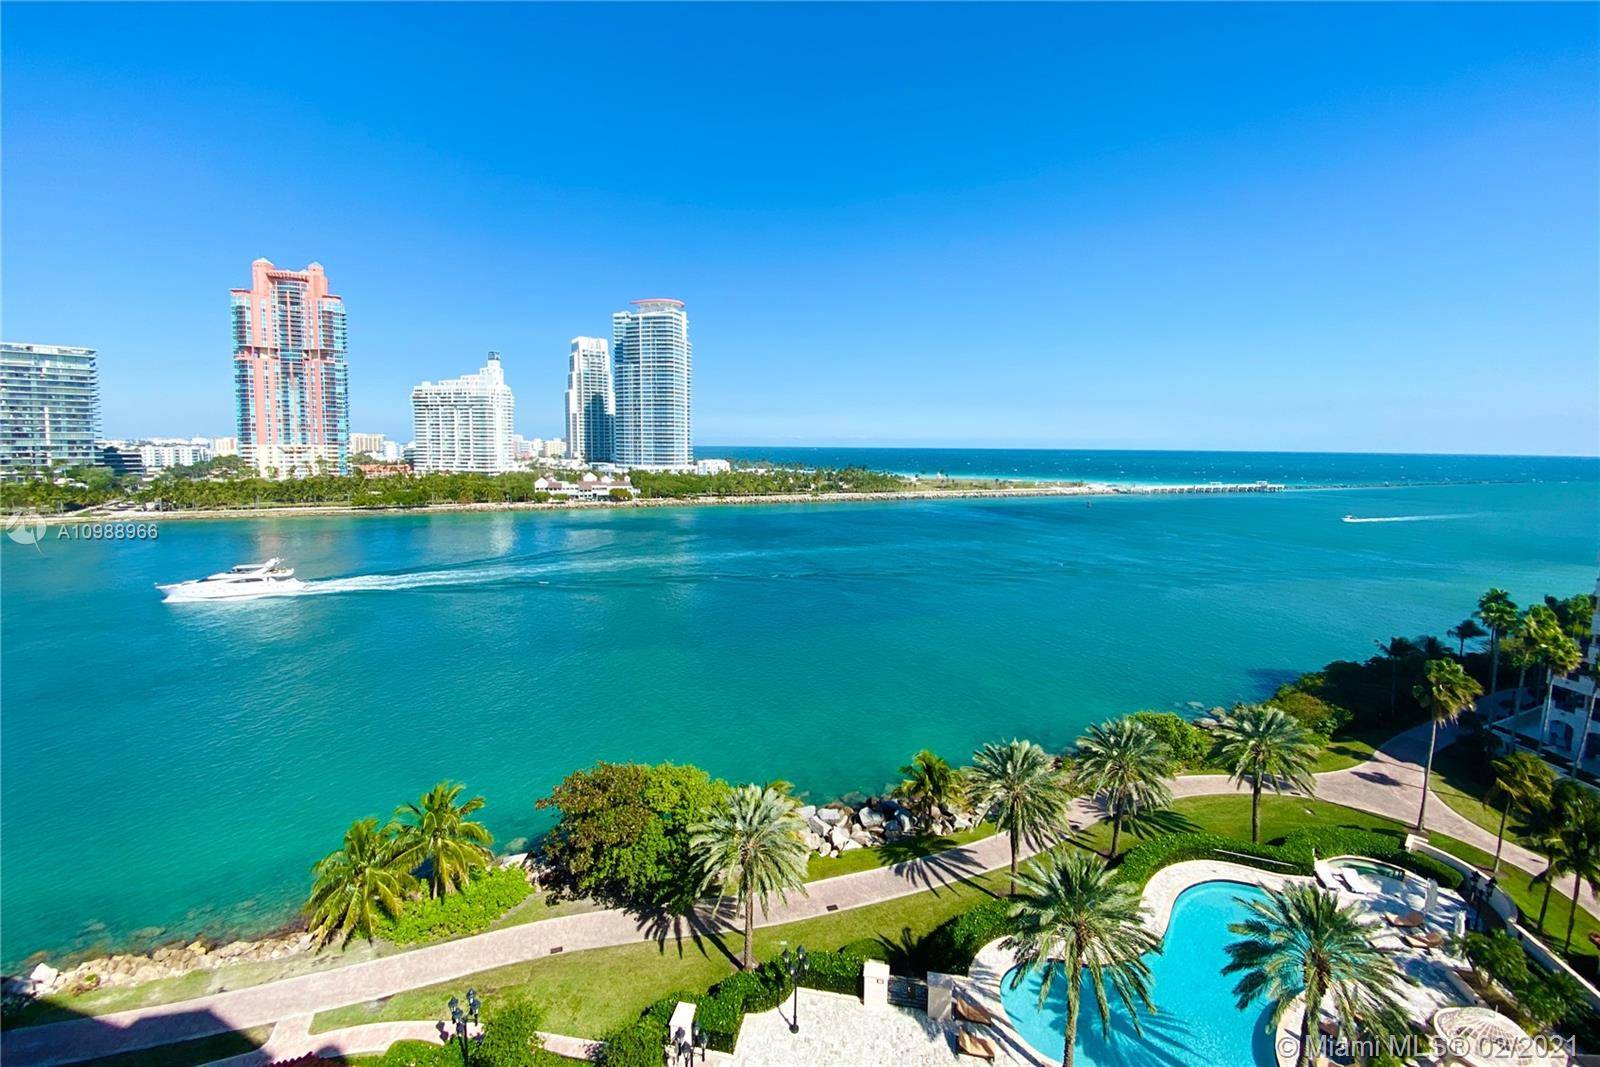 JAW DROPPING FISHER ISLAND LOWER PENTHOUSE CURATED BY ELITE INTERIOR DESIGNER LORRAINE LETENDRE WITH DIRECT VIEWS OF SOUTH BEACH, OCEAN, GOLF COURSE MIAMI SKYLINE IN THE FULL SERVICE TOWER AT ...